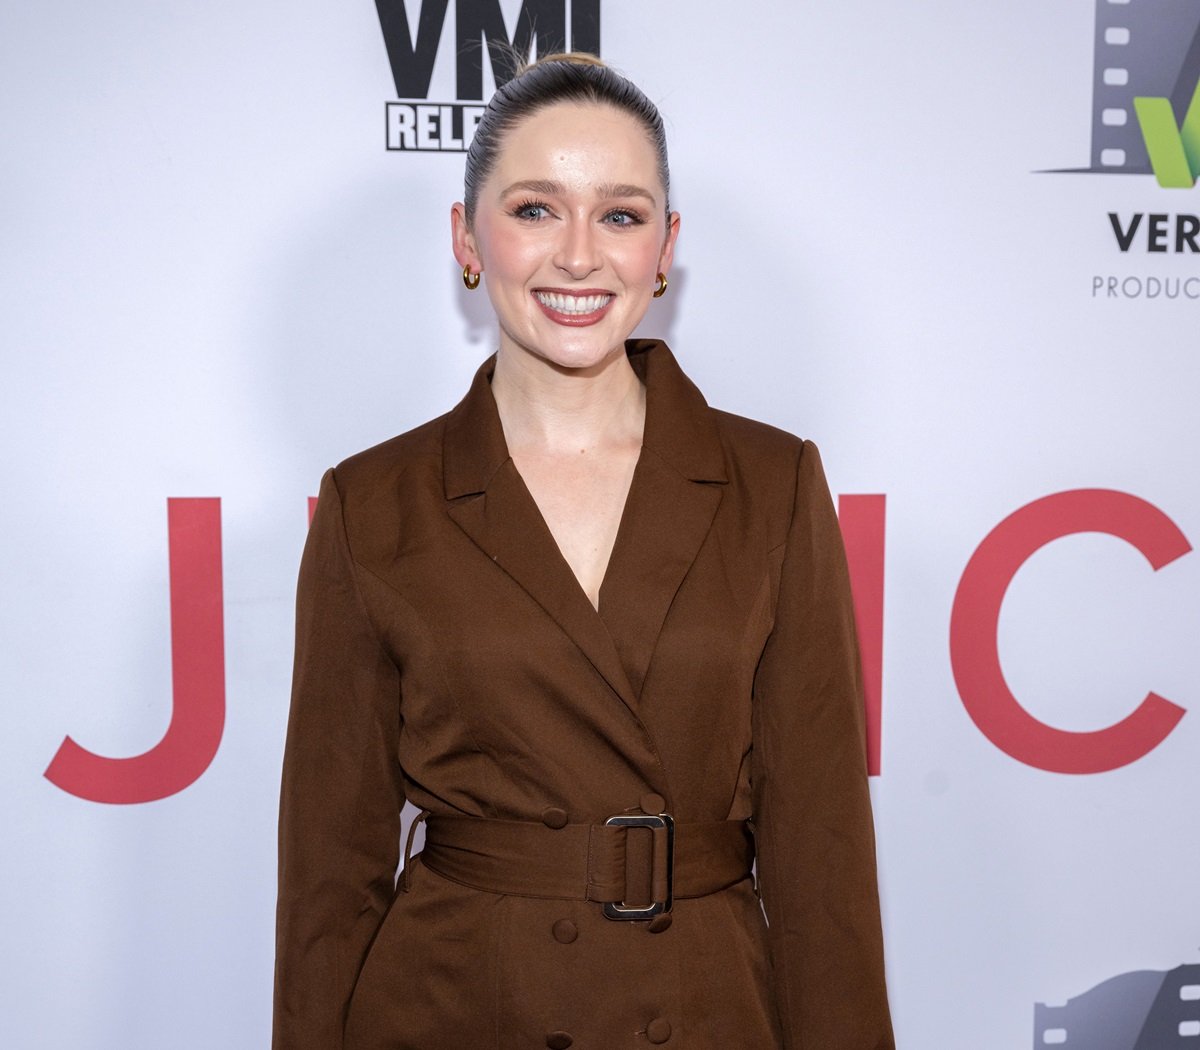 Greer Grammer attends the Los Angeles Premiere of "Junction" at Harmony Gold on January 24, 2024 in Los Angeles, California